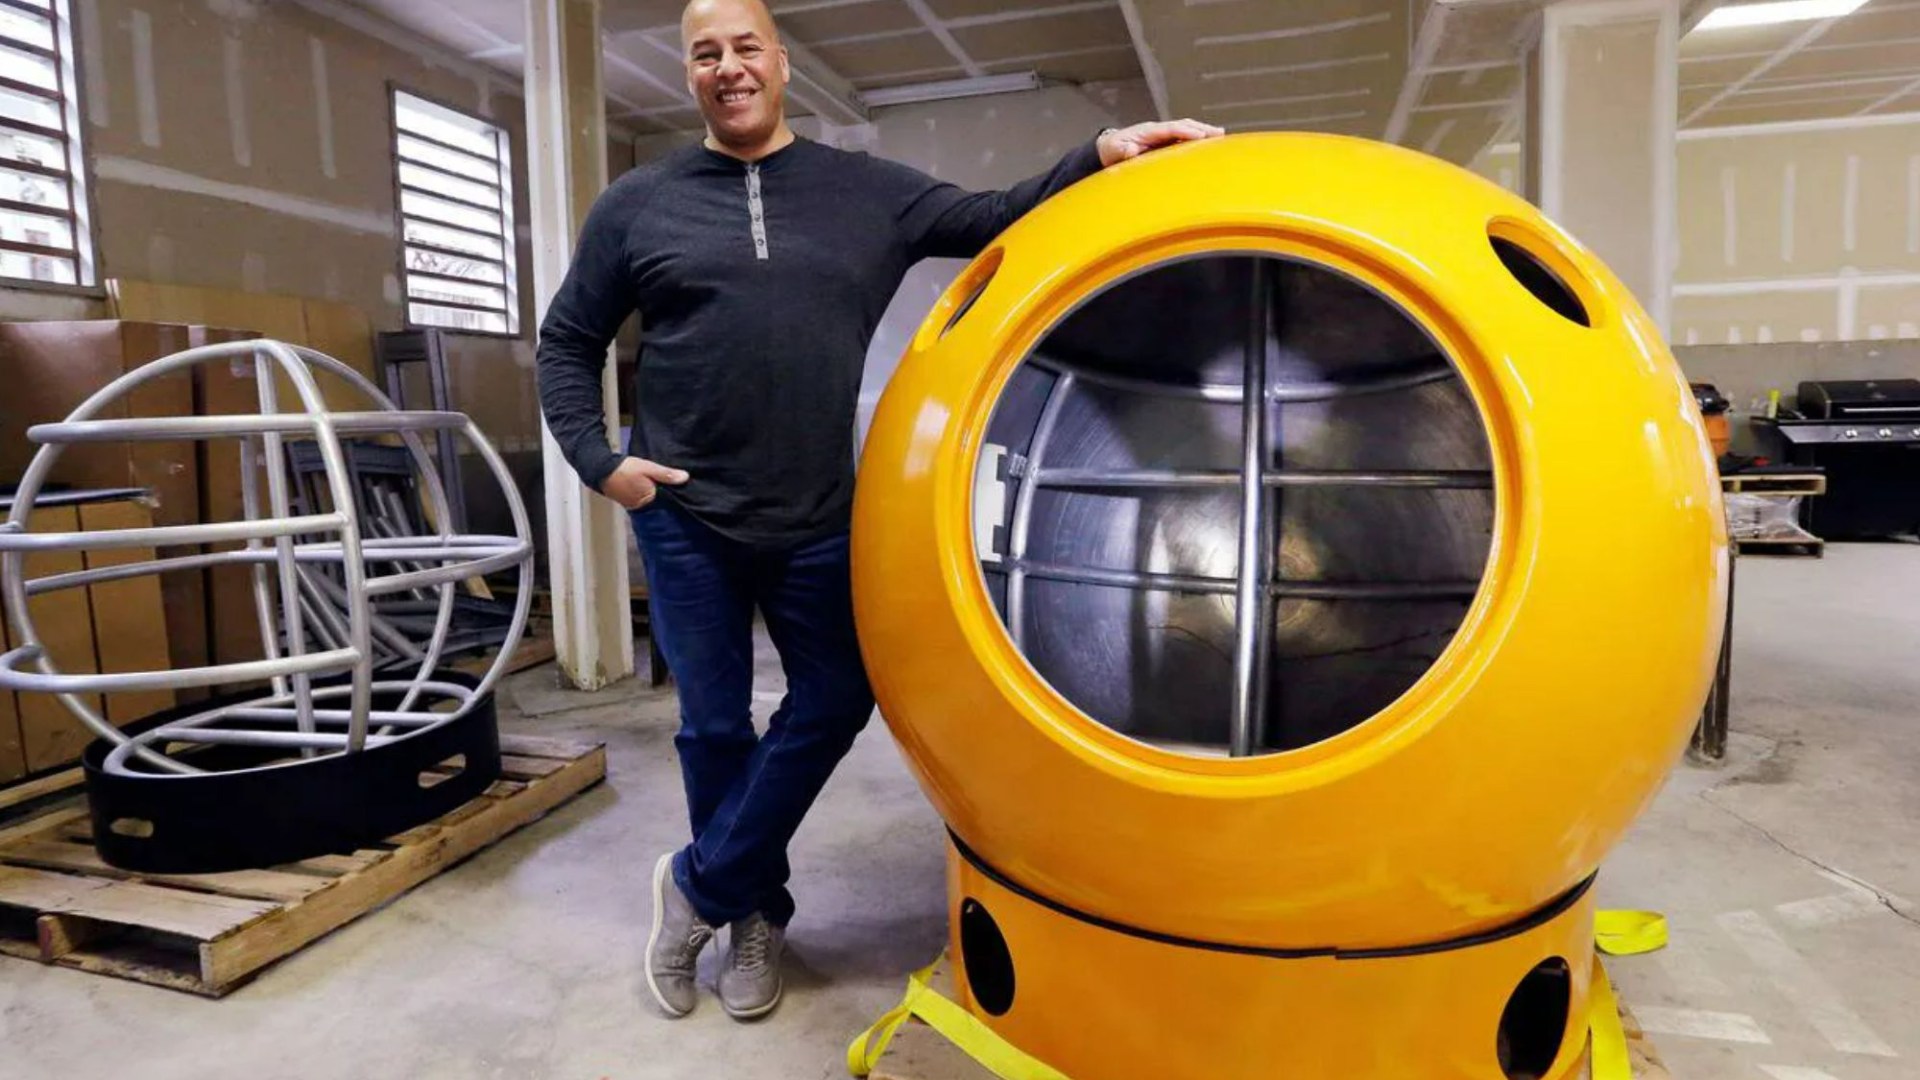 Worlds first 15,000 bulletproof survival pods where you can live for WEEKS to ride out tsunamis & disasters  The Sun [Video]